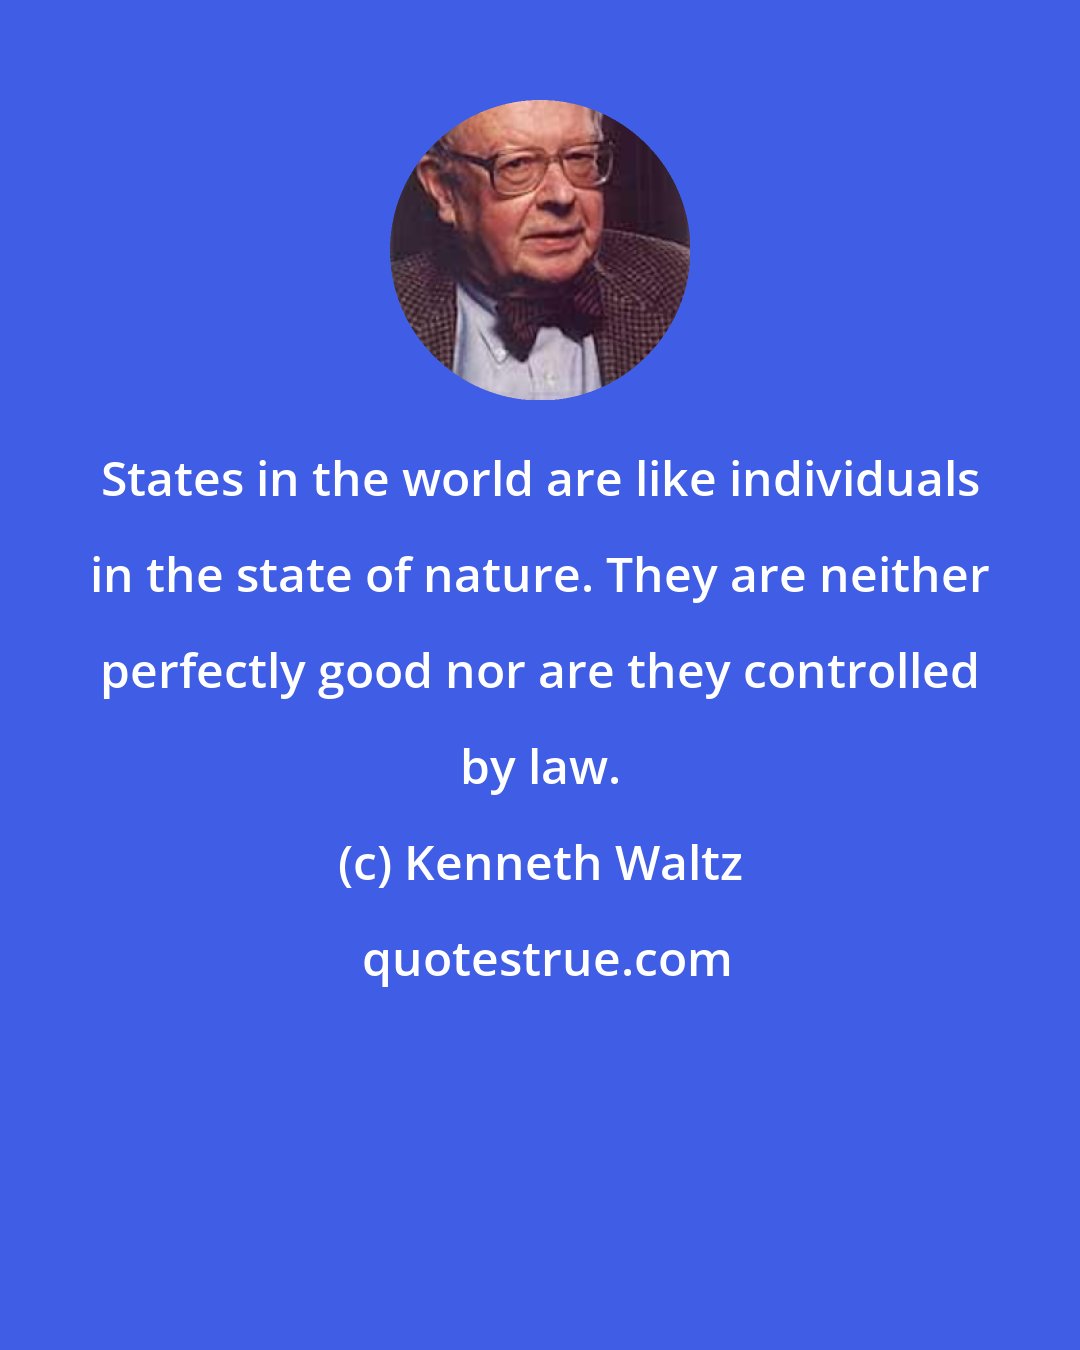 Kenneth Waltz: States in the world are like individuals in the state of nature. They are neither perfectly good nor are they controlled by law.